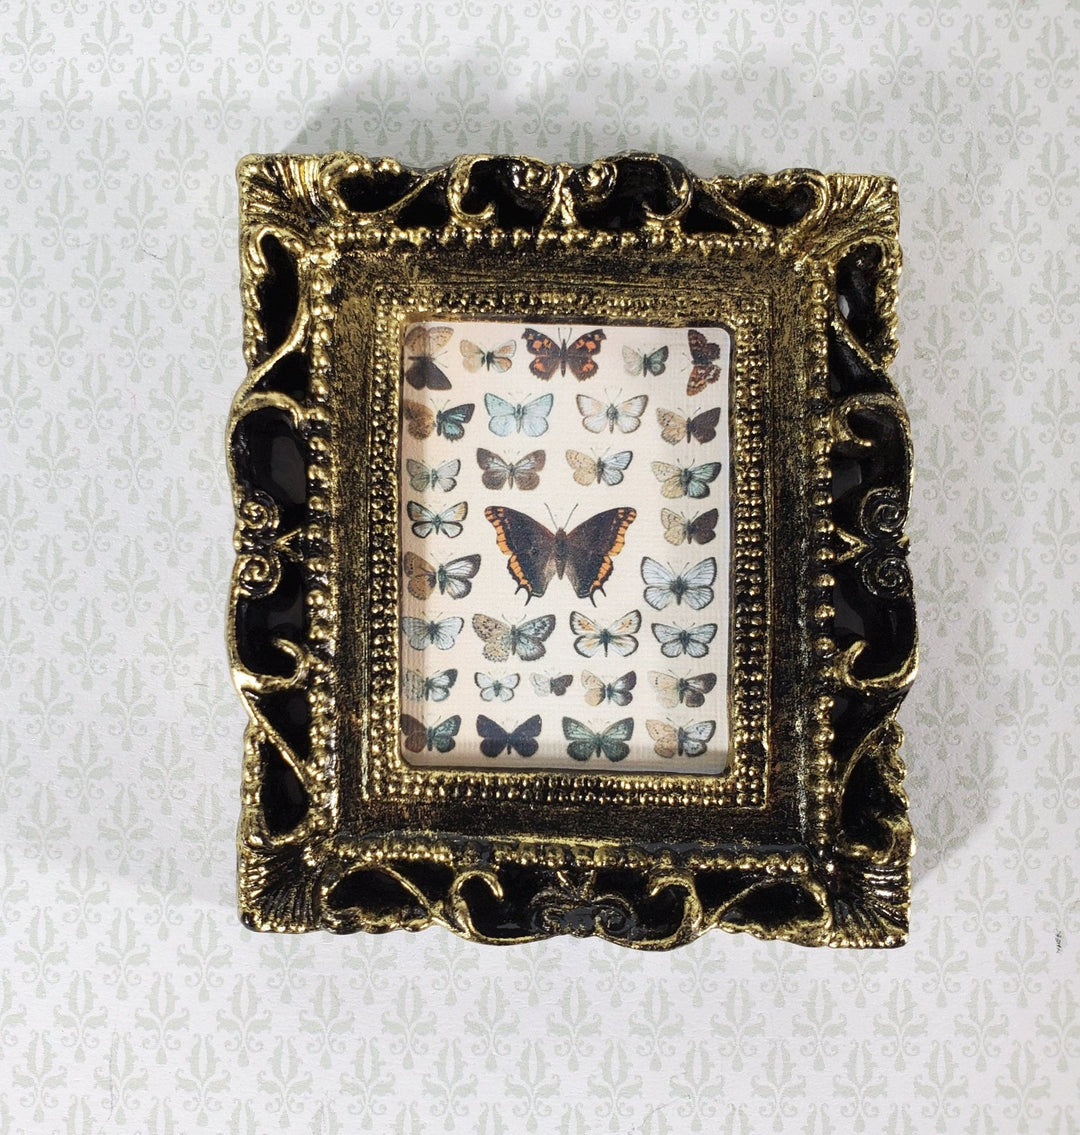 Miniature Vintage Butterfly Drawings Framed Print 1:12 Scale Dollhouse - Miniature Crush